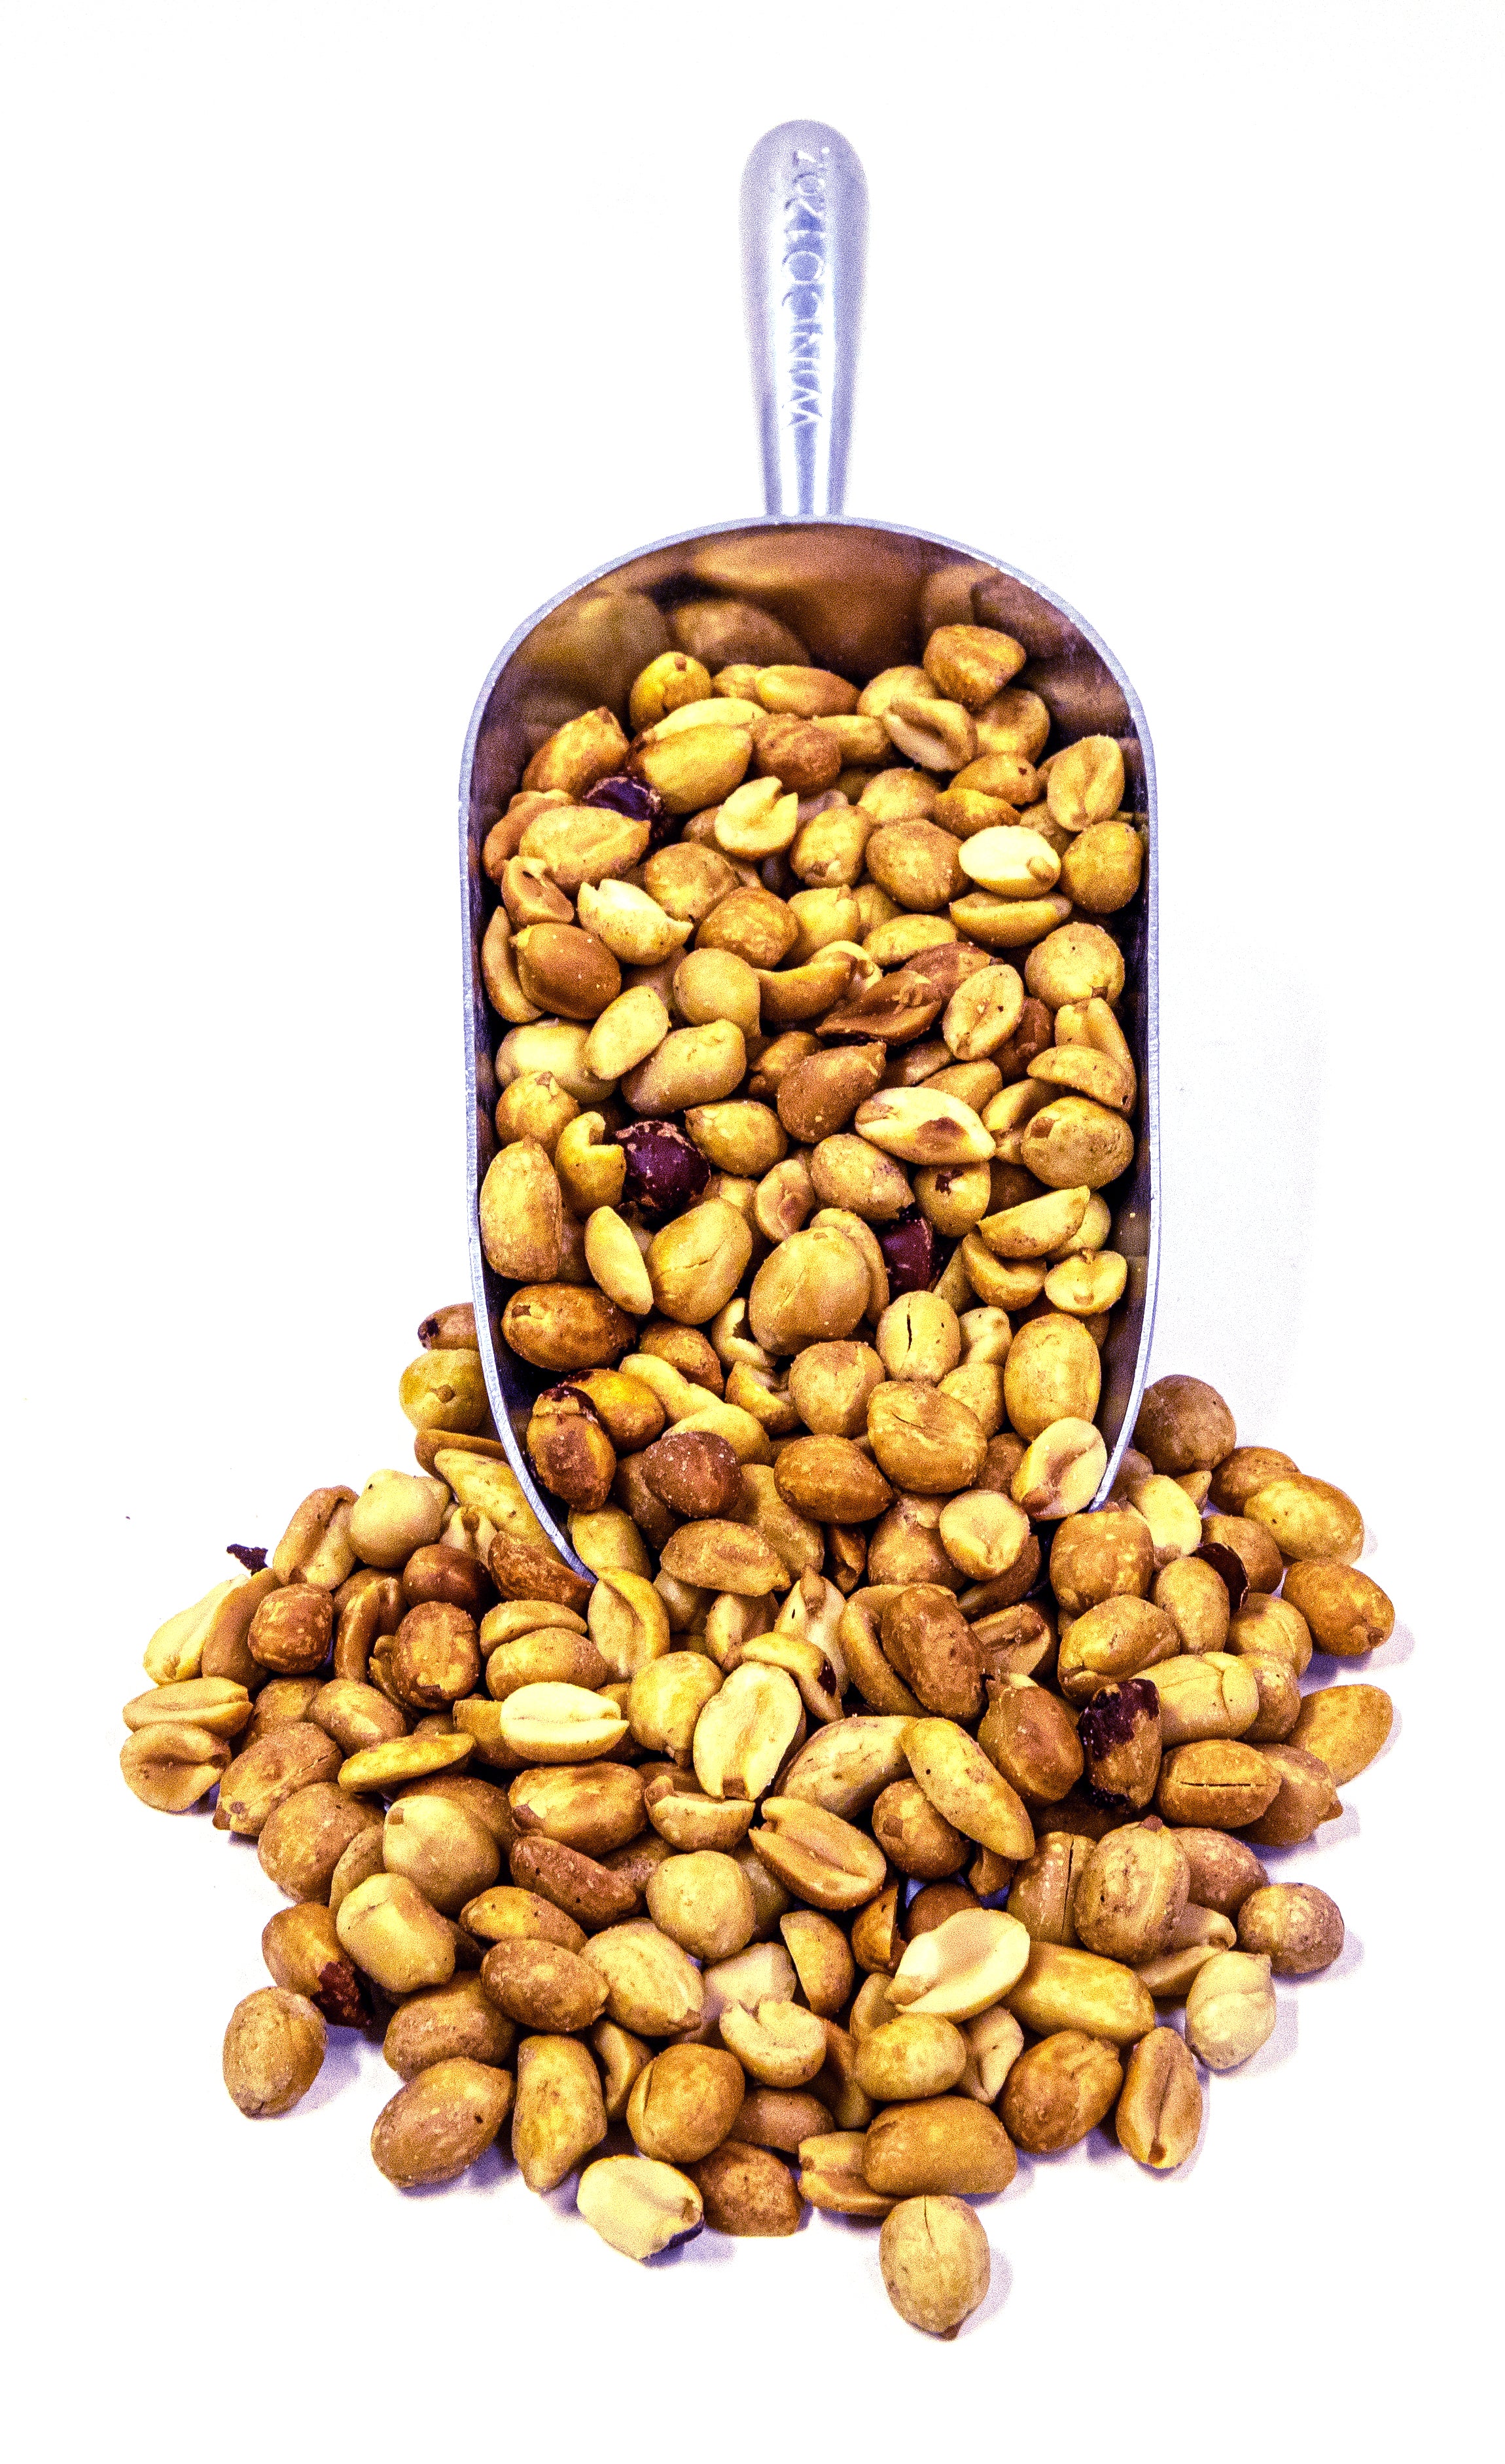 Roasted, No Salt Blanched Peanuts